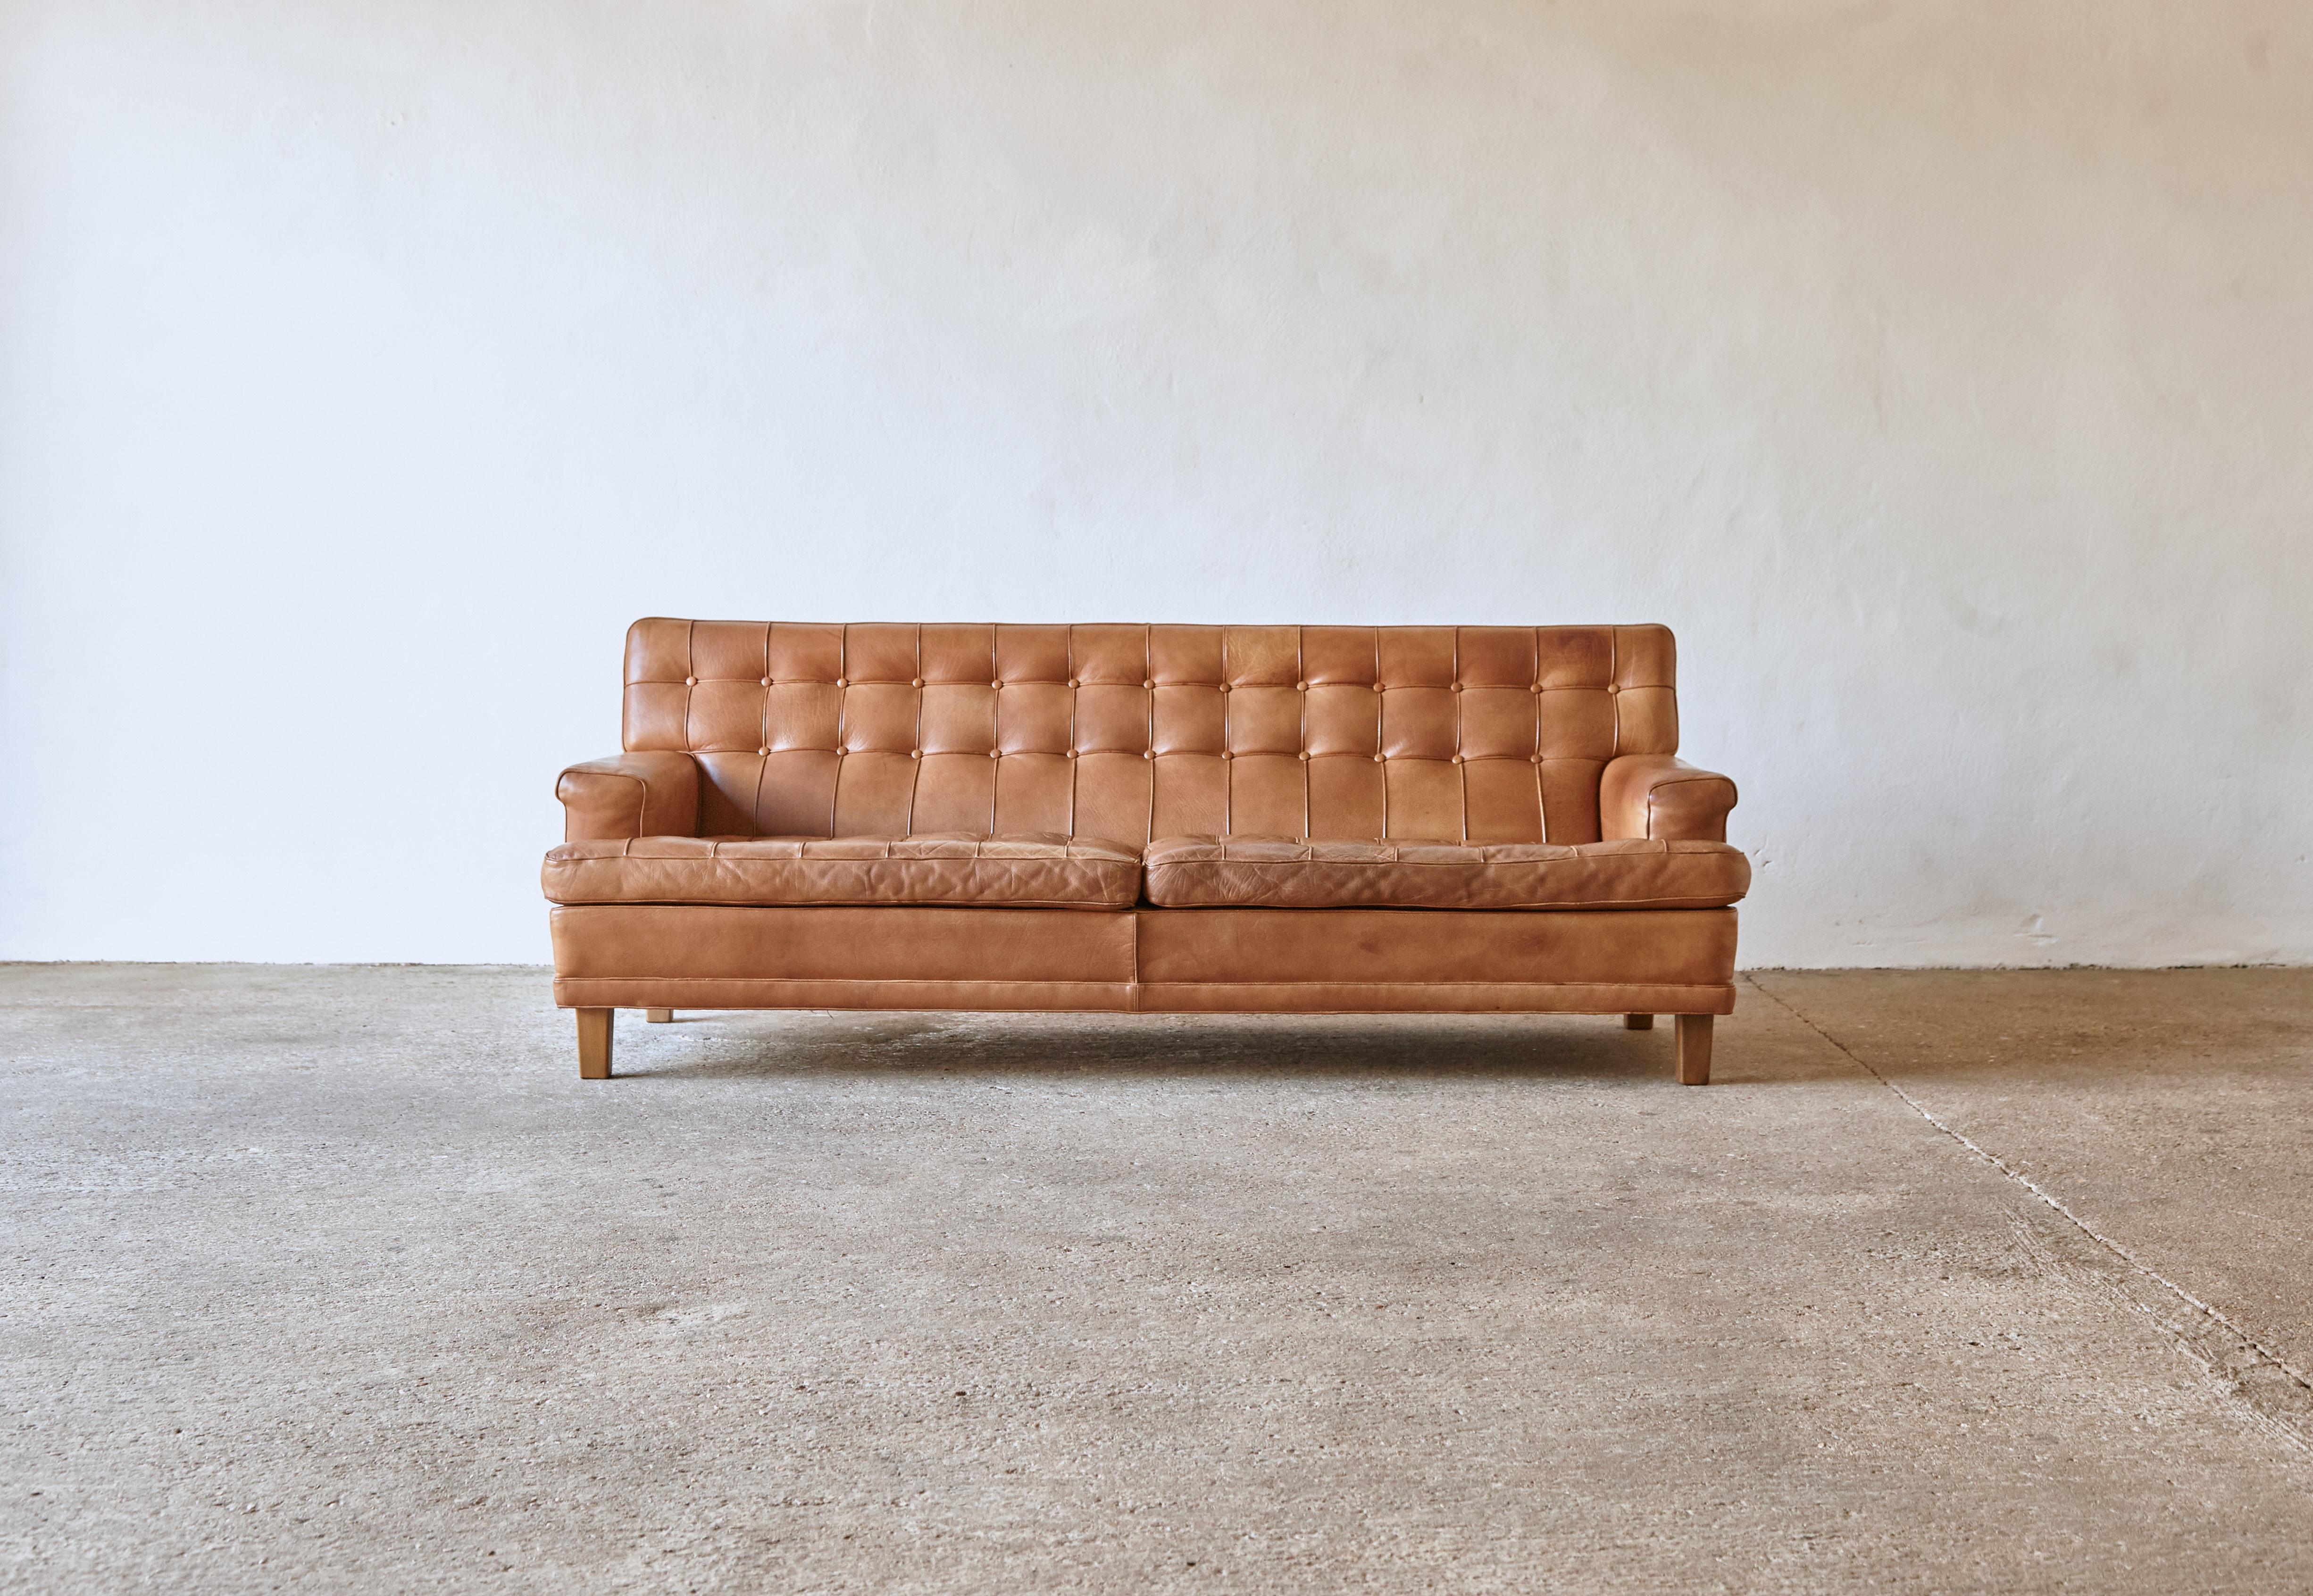 An Arne Norell leather Merkur / Mexico sofa, Sweden, Norell Mobel, 1970s in cognac buffalo leather. Lovely vintage condition with a superb patina and tone. A wonderful example, in very nice condition for its age with minimal signs of use and wear.